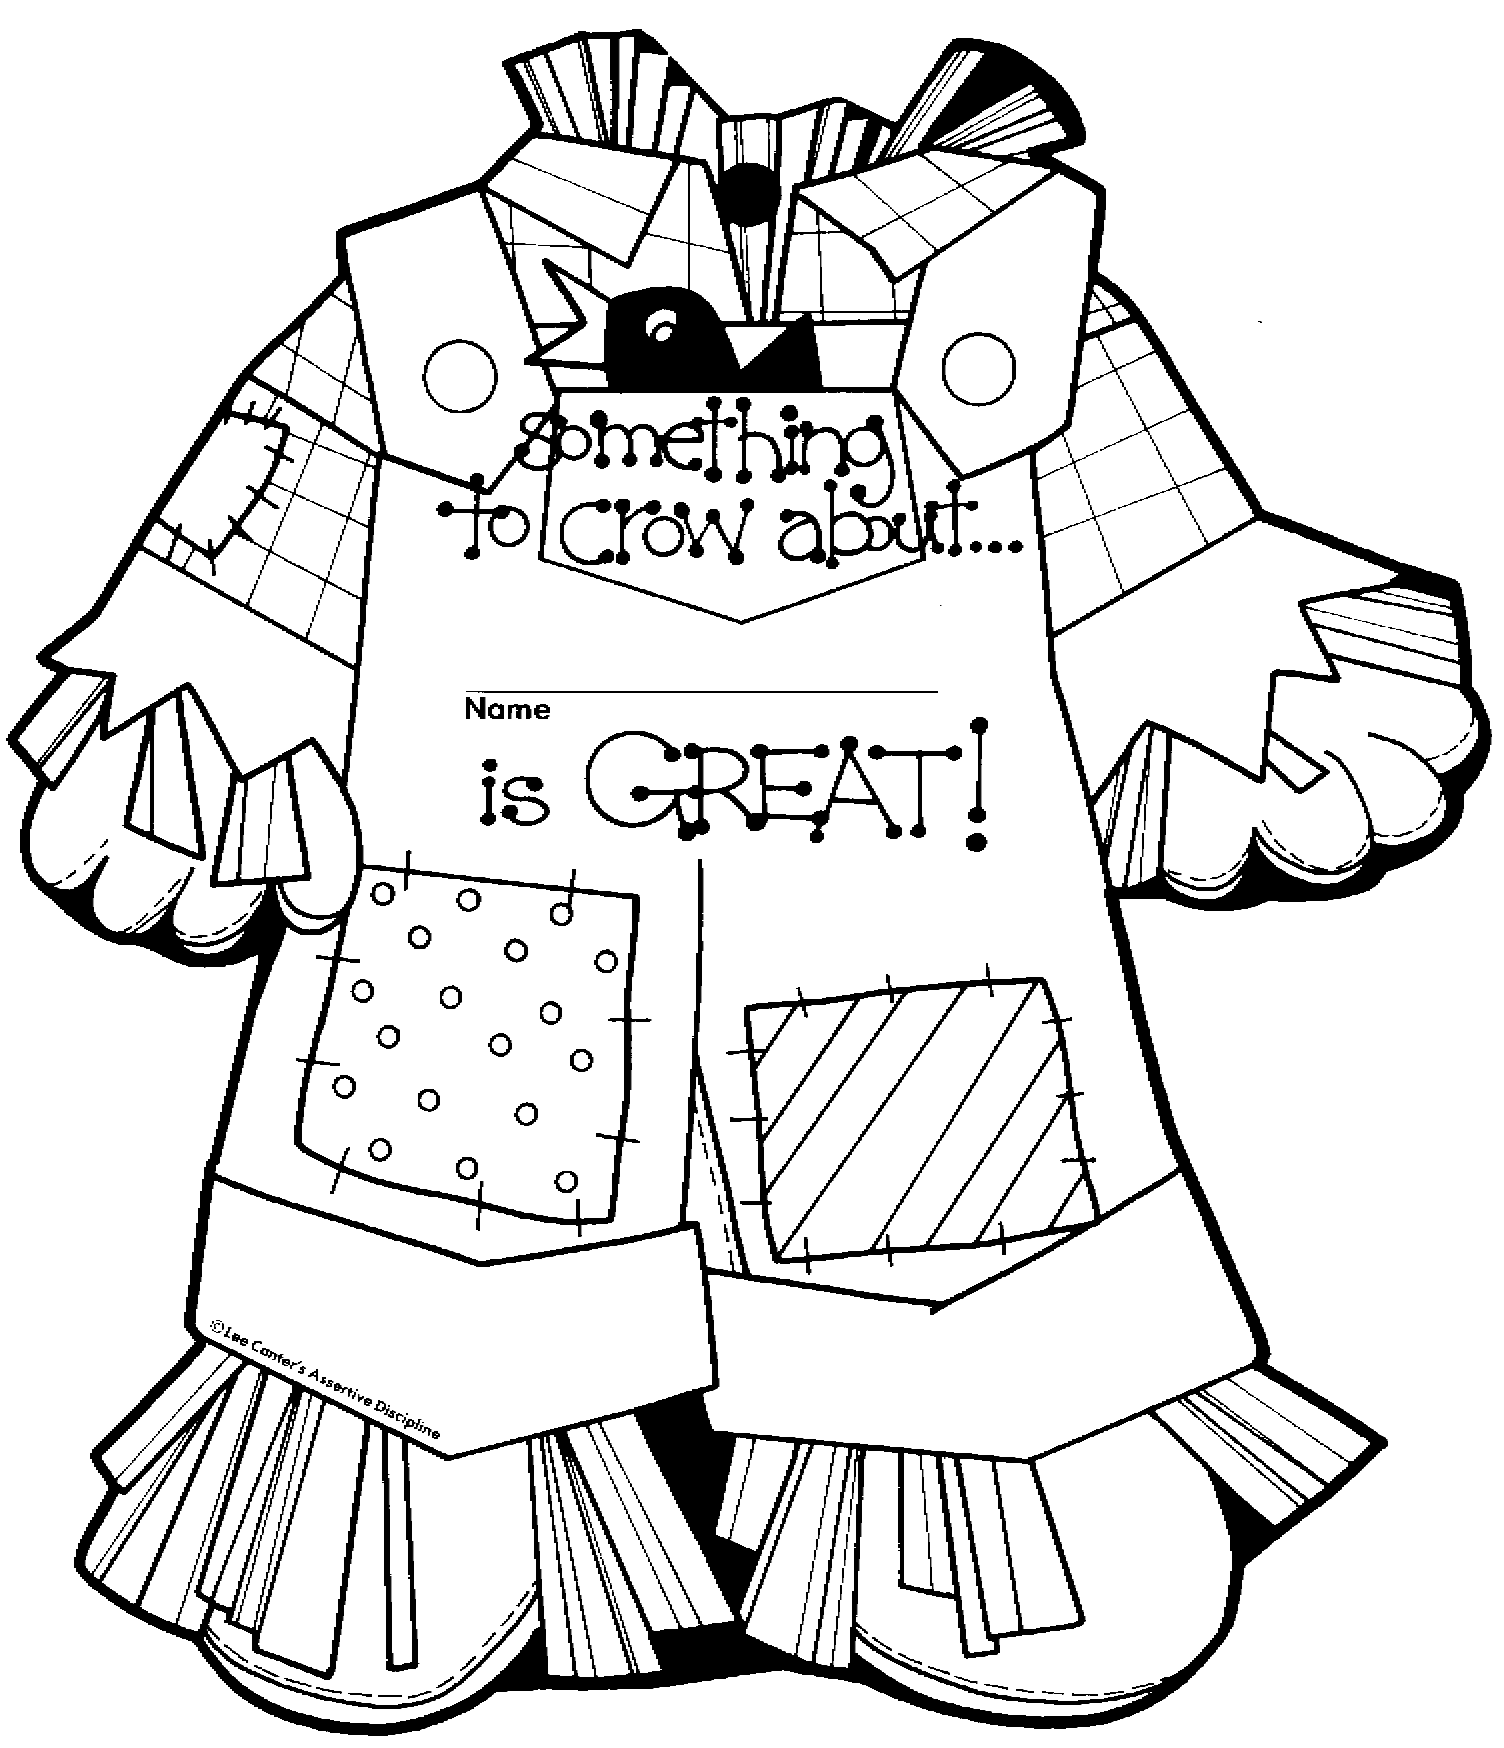 Scarecrow coloring pages to download and print for free